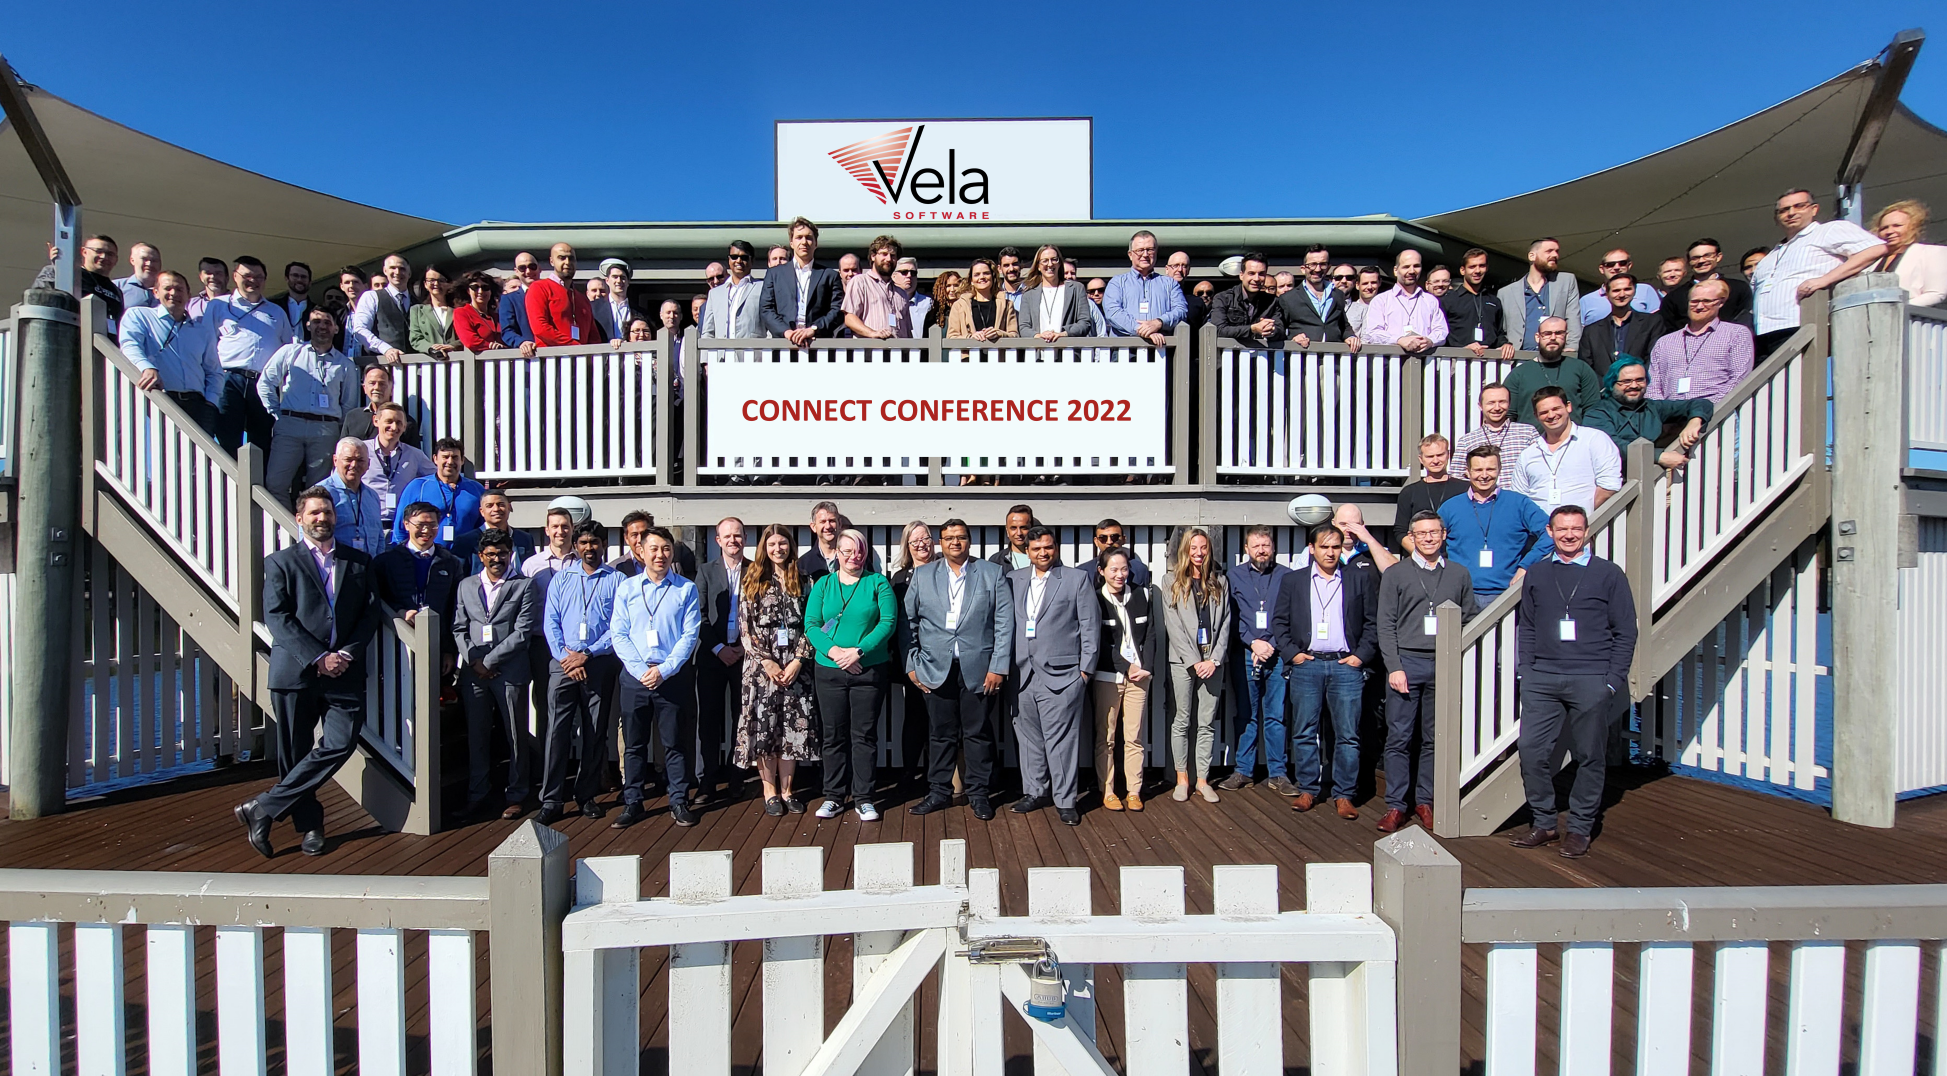 Team photo of attendees at Vela Connect Conference 2022